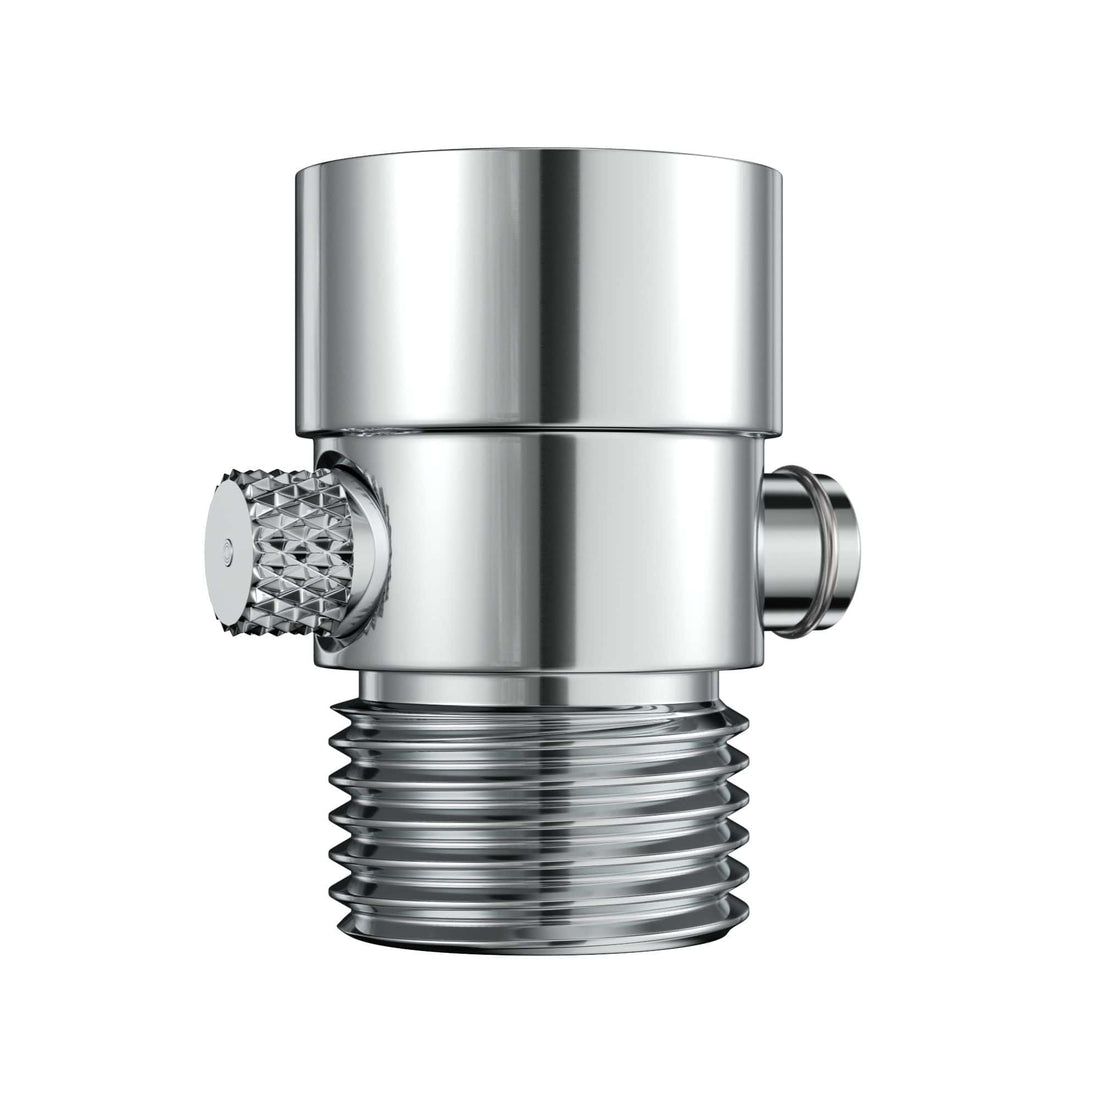 Chrome Trickle Valve for Shower Heads - The Shower Head Store